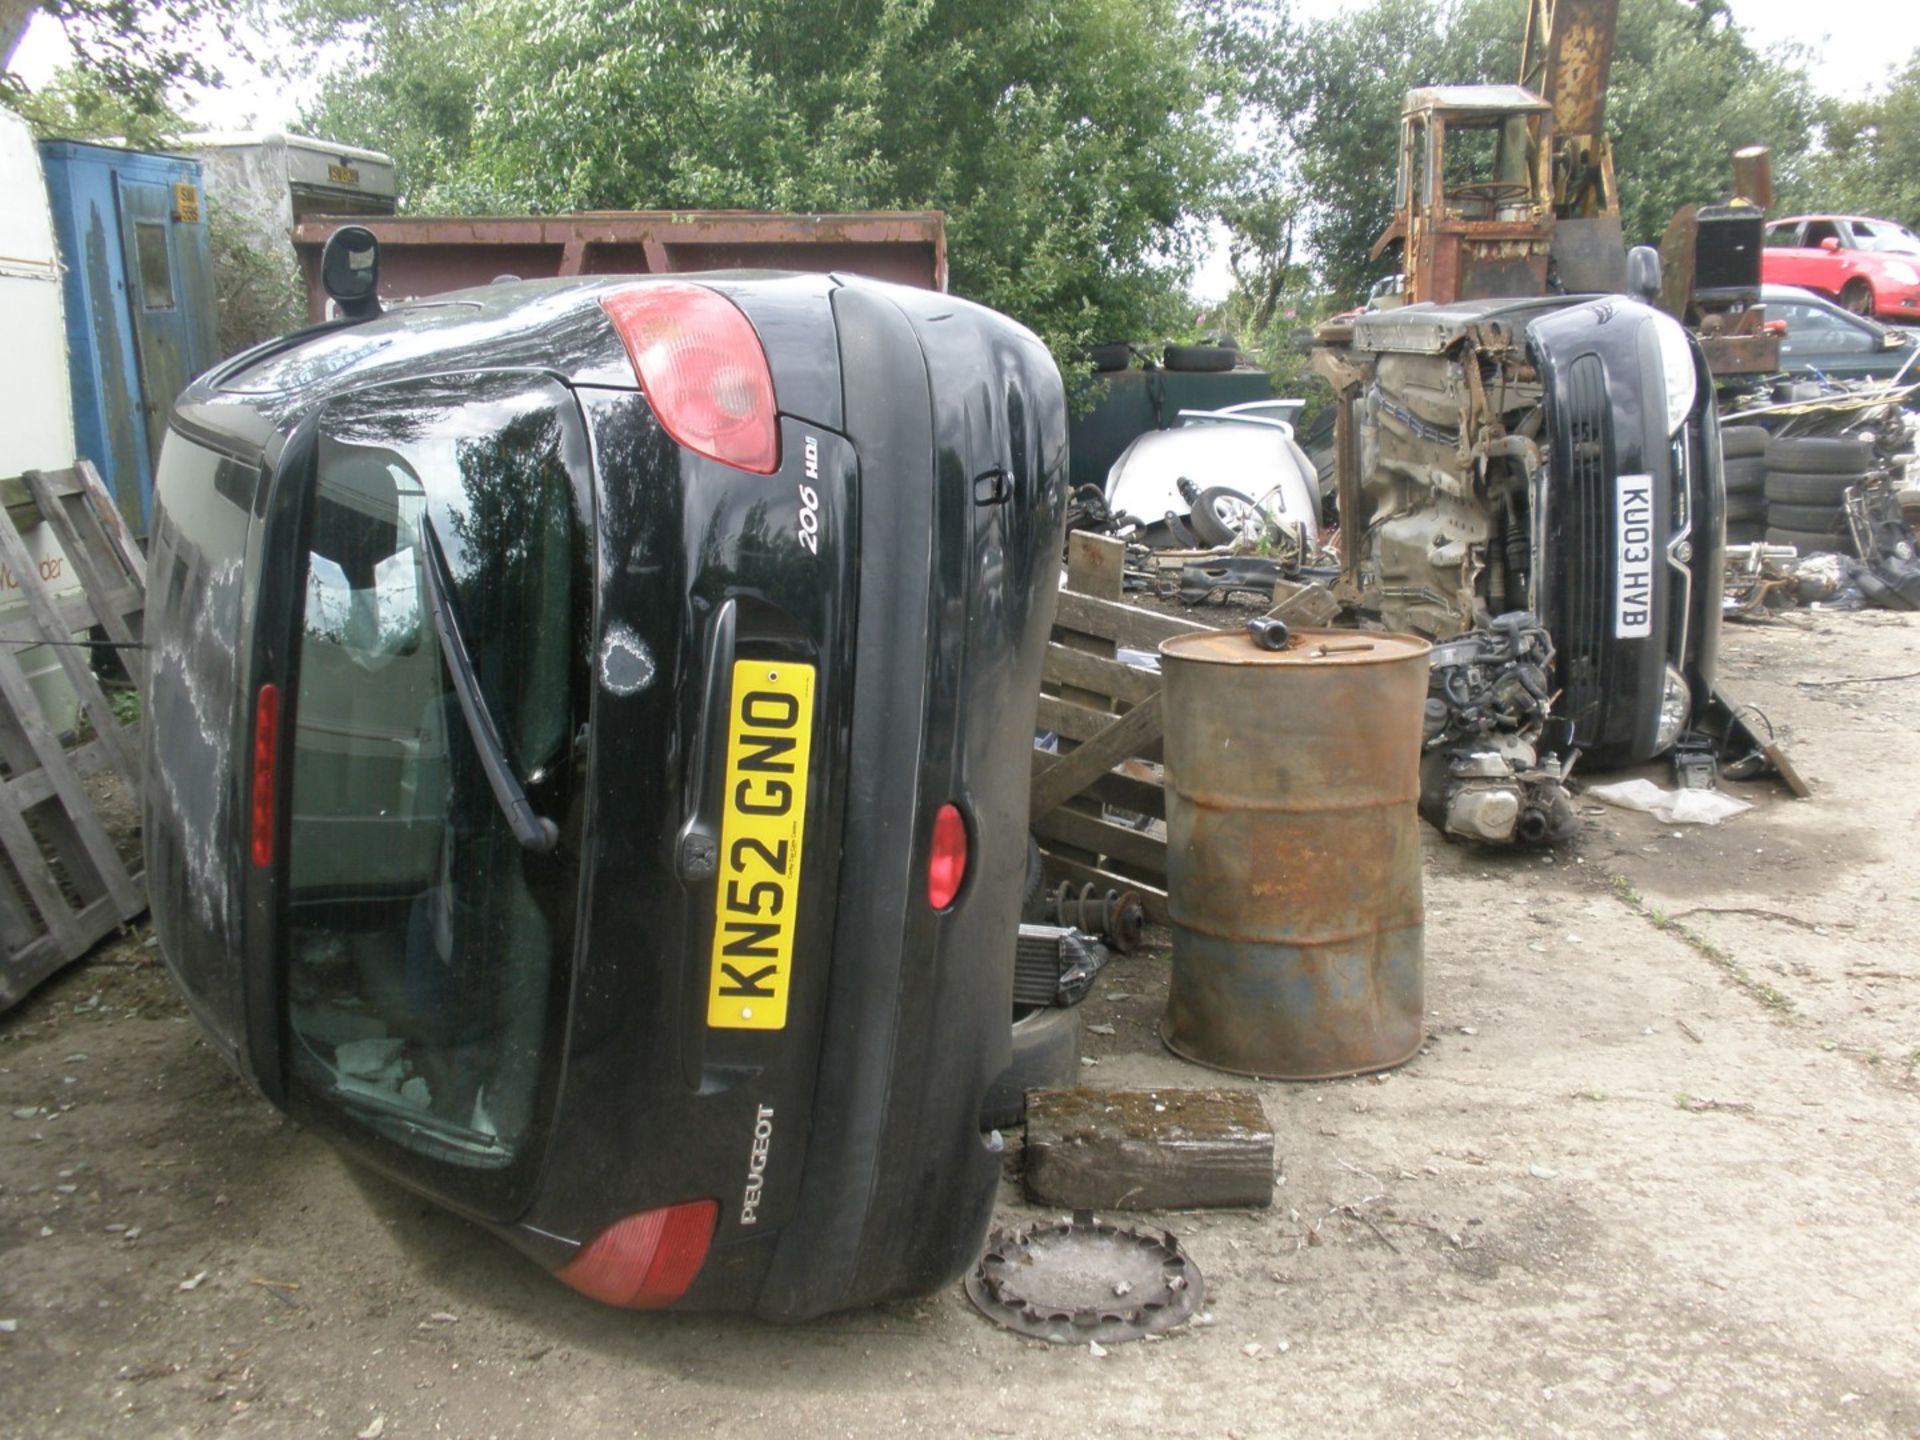 The Residual Scrap Vehicles on site together with other scrap hidden in the undergrowth. To include - Image 10 of 10